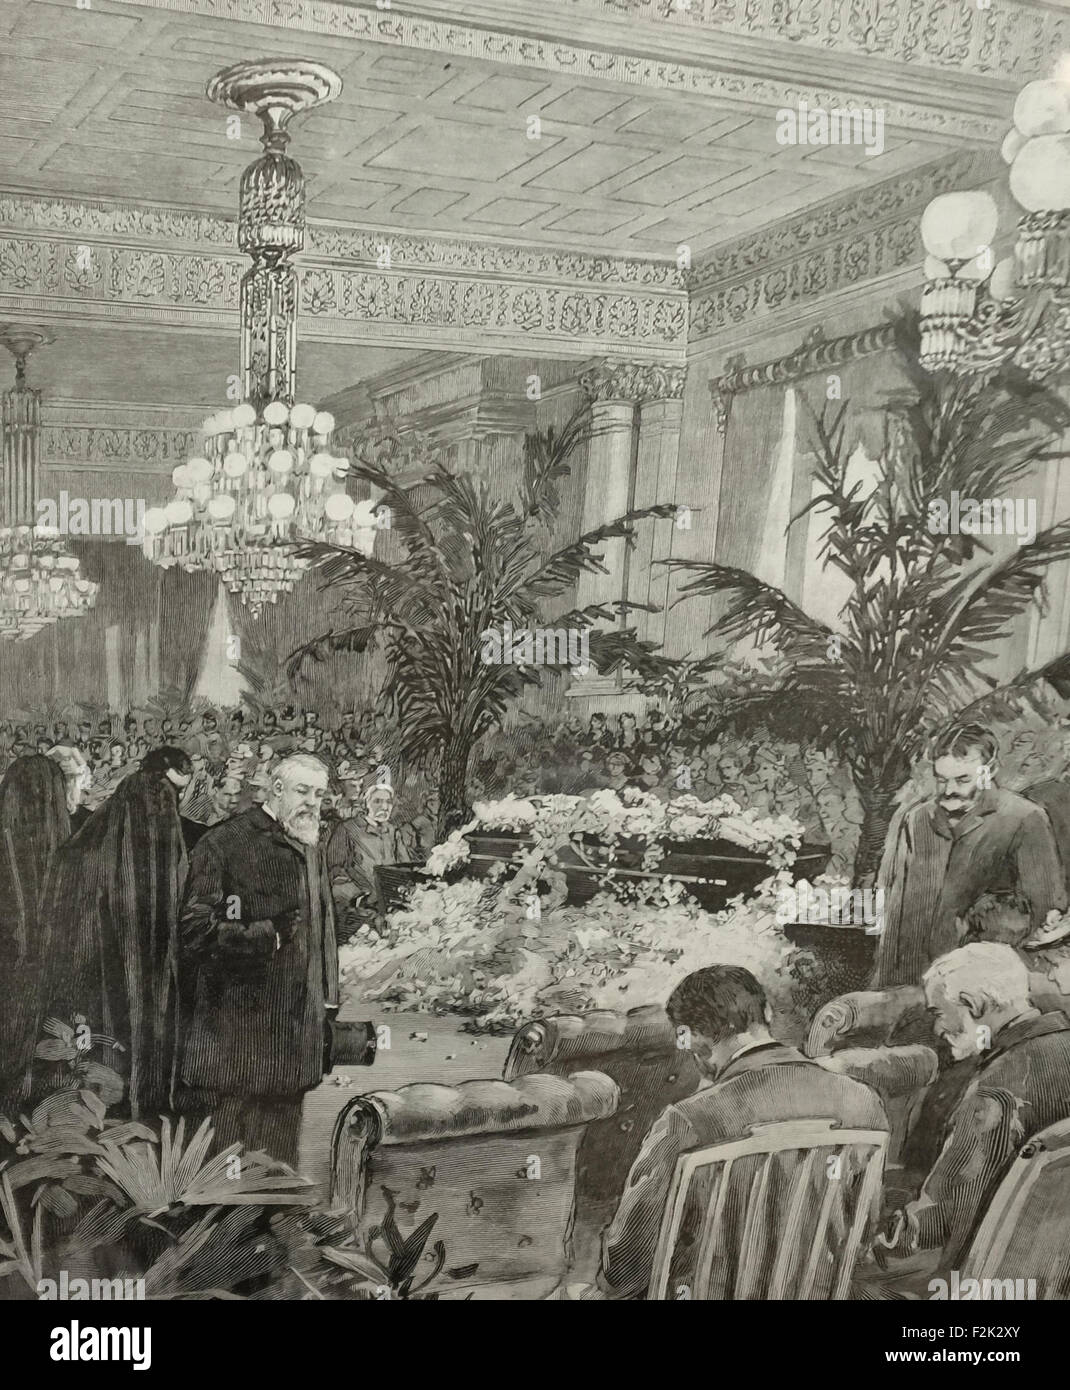 The obsequies of Mrs Harrison in the East Room of the White House, Washington, DC, Funeral of the wife of President Benjamin Harrison, 1892 Stock Photo